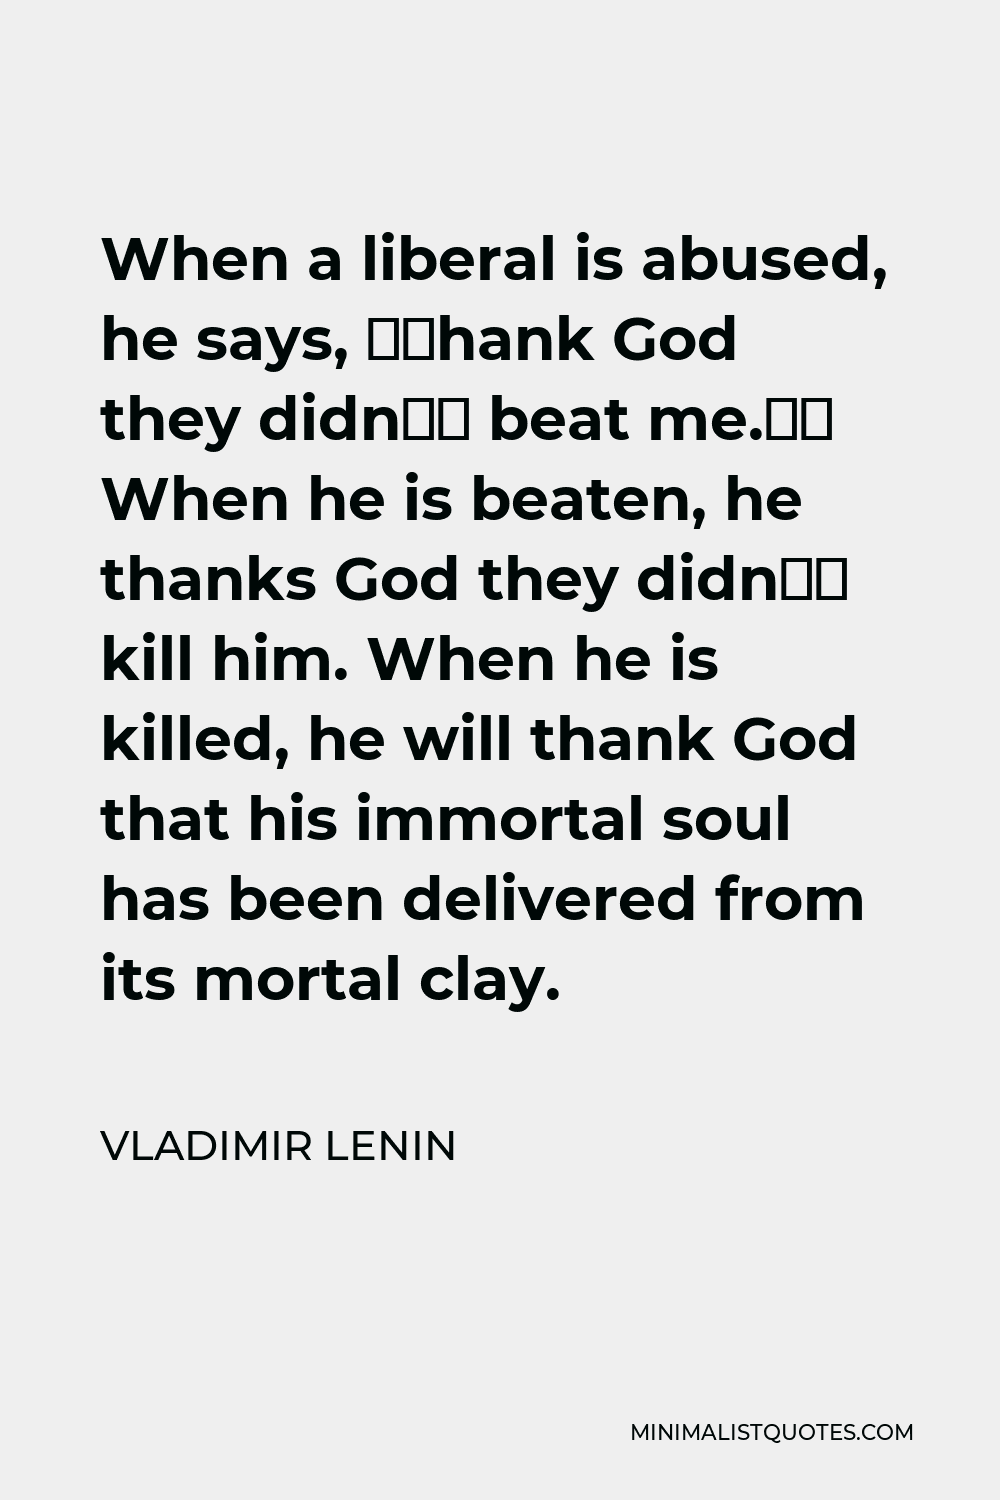 Vladimir Lenin Quote - When a liberal is abused, he says, ‘Thank God they didn’t beat me.’ When he is beaten, he thanks God they didn’t kill him. When he is killed, he will thank God that his immortal soul has been delivered from its mortal clay.